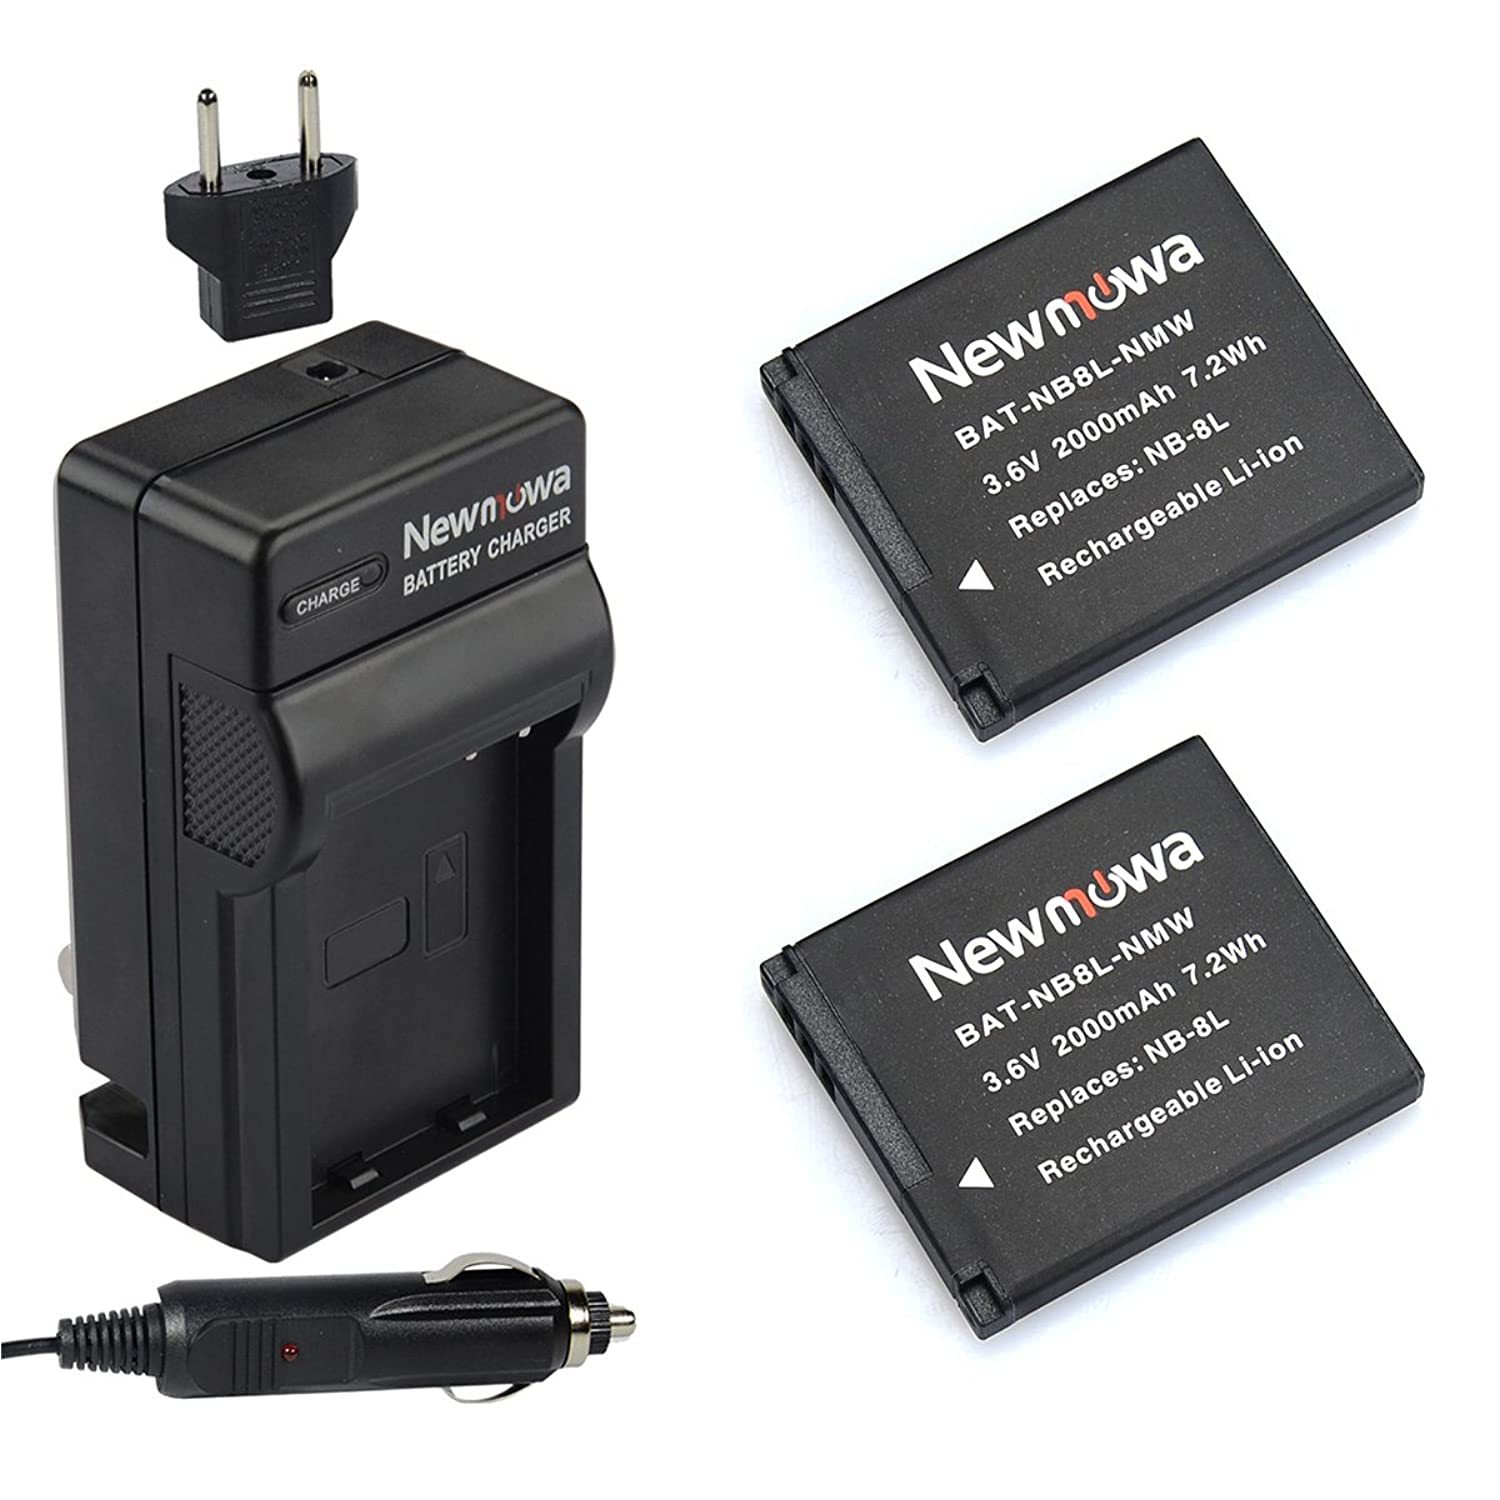 Primary image for Newmowa NB-8L Replacement Battery (2-Pack) and Charger Kit for Canon NB-8L,CB-2L